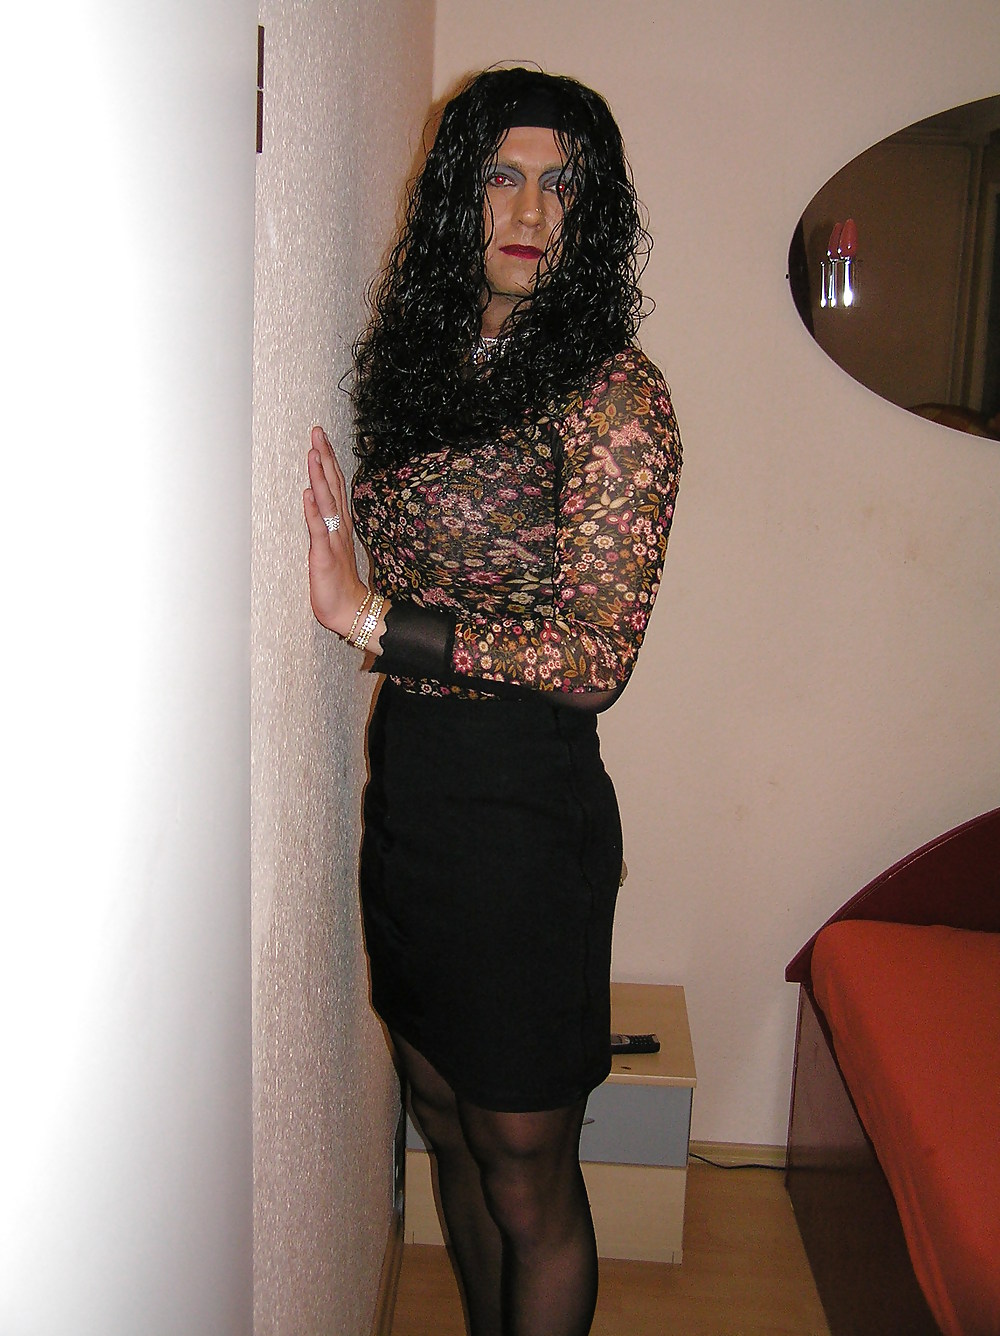 Trans Hooker Hannover Putain Pas Cher Pute Pute Transexuelle #23971162